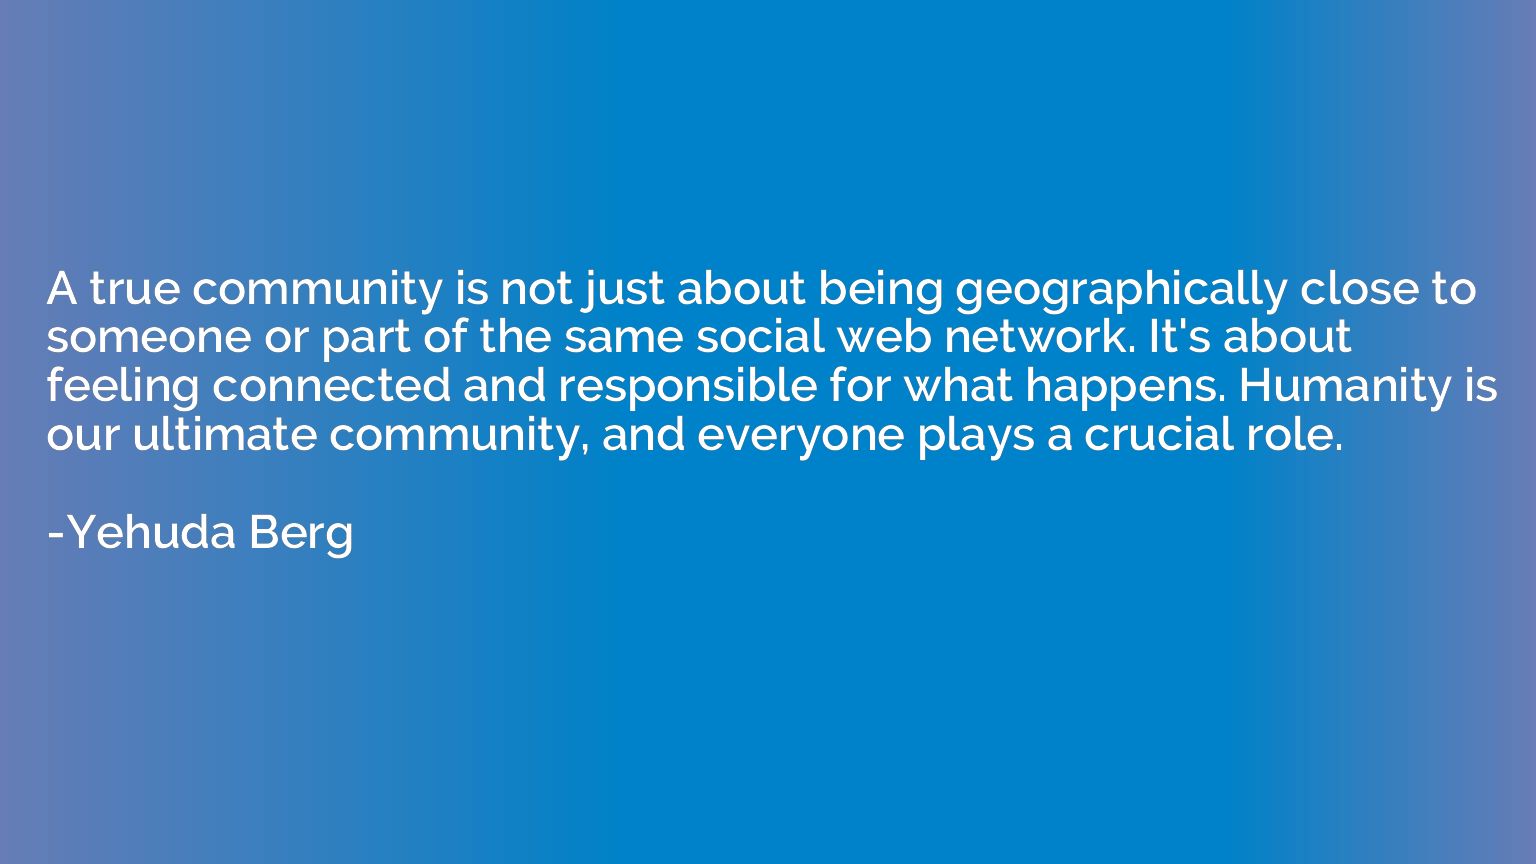 A true community is not just about being geographically clos